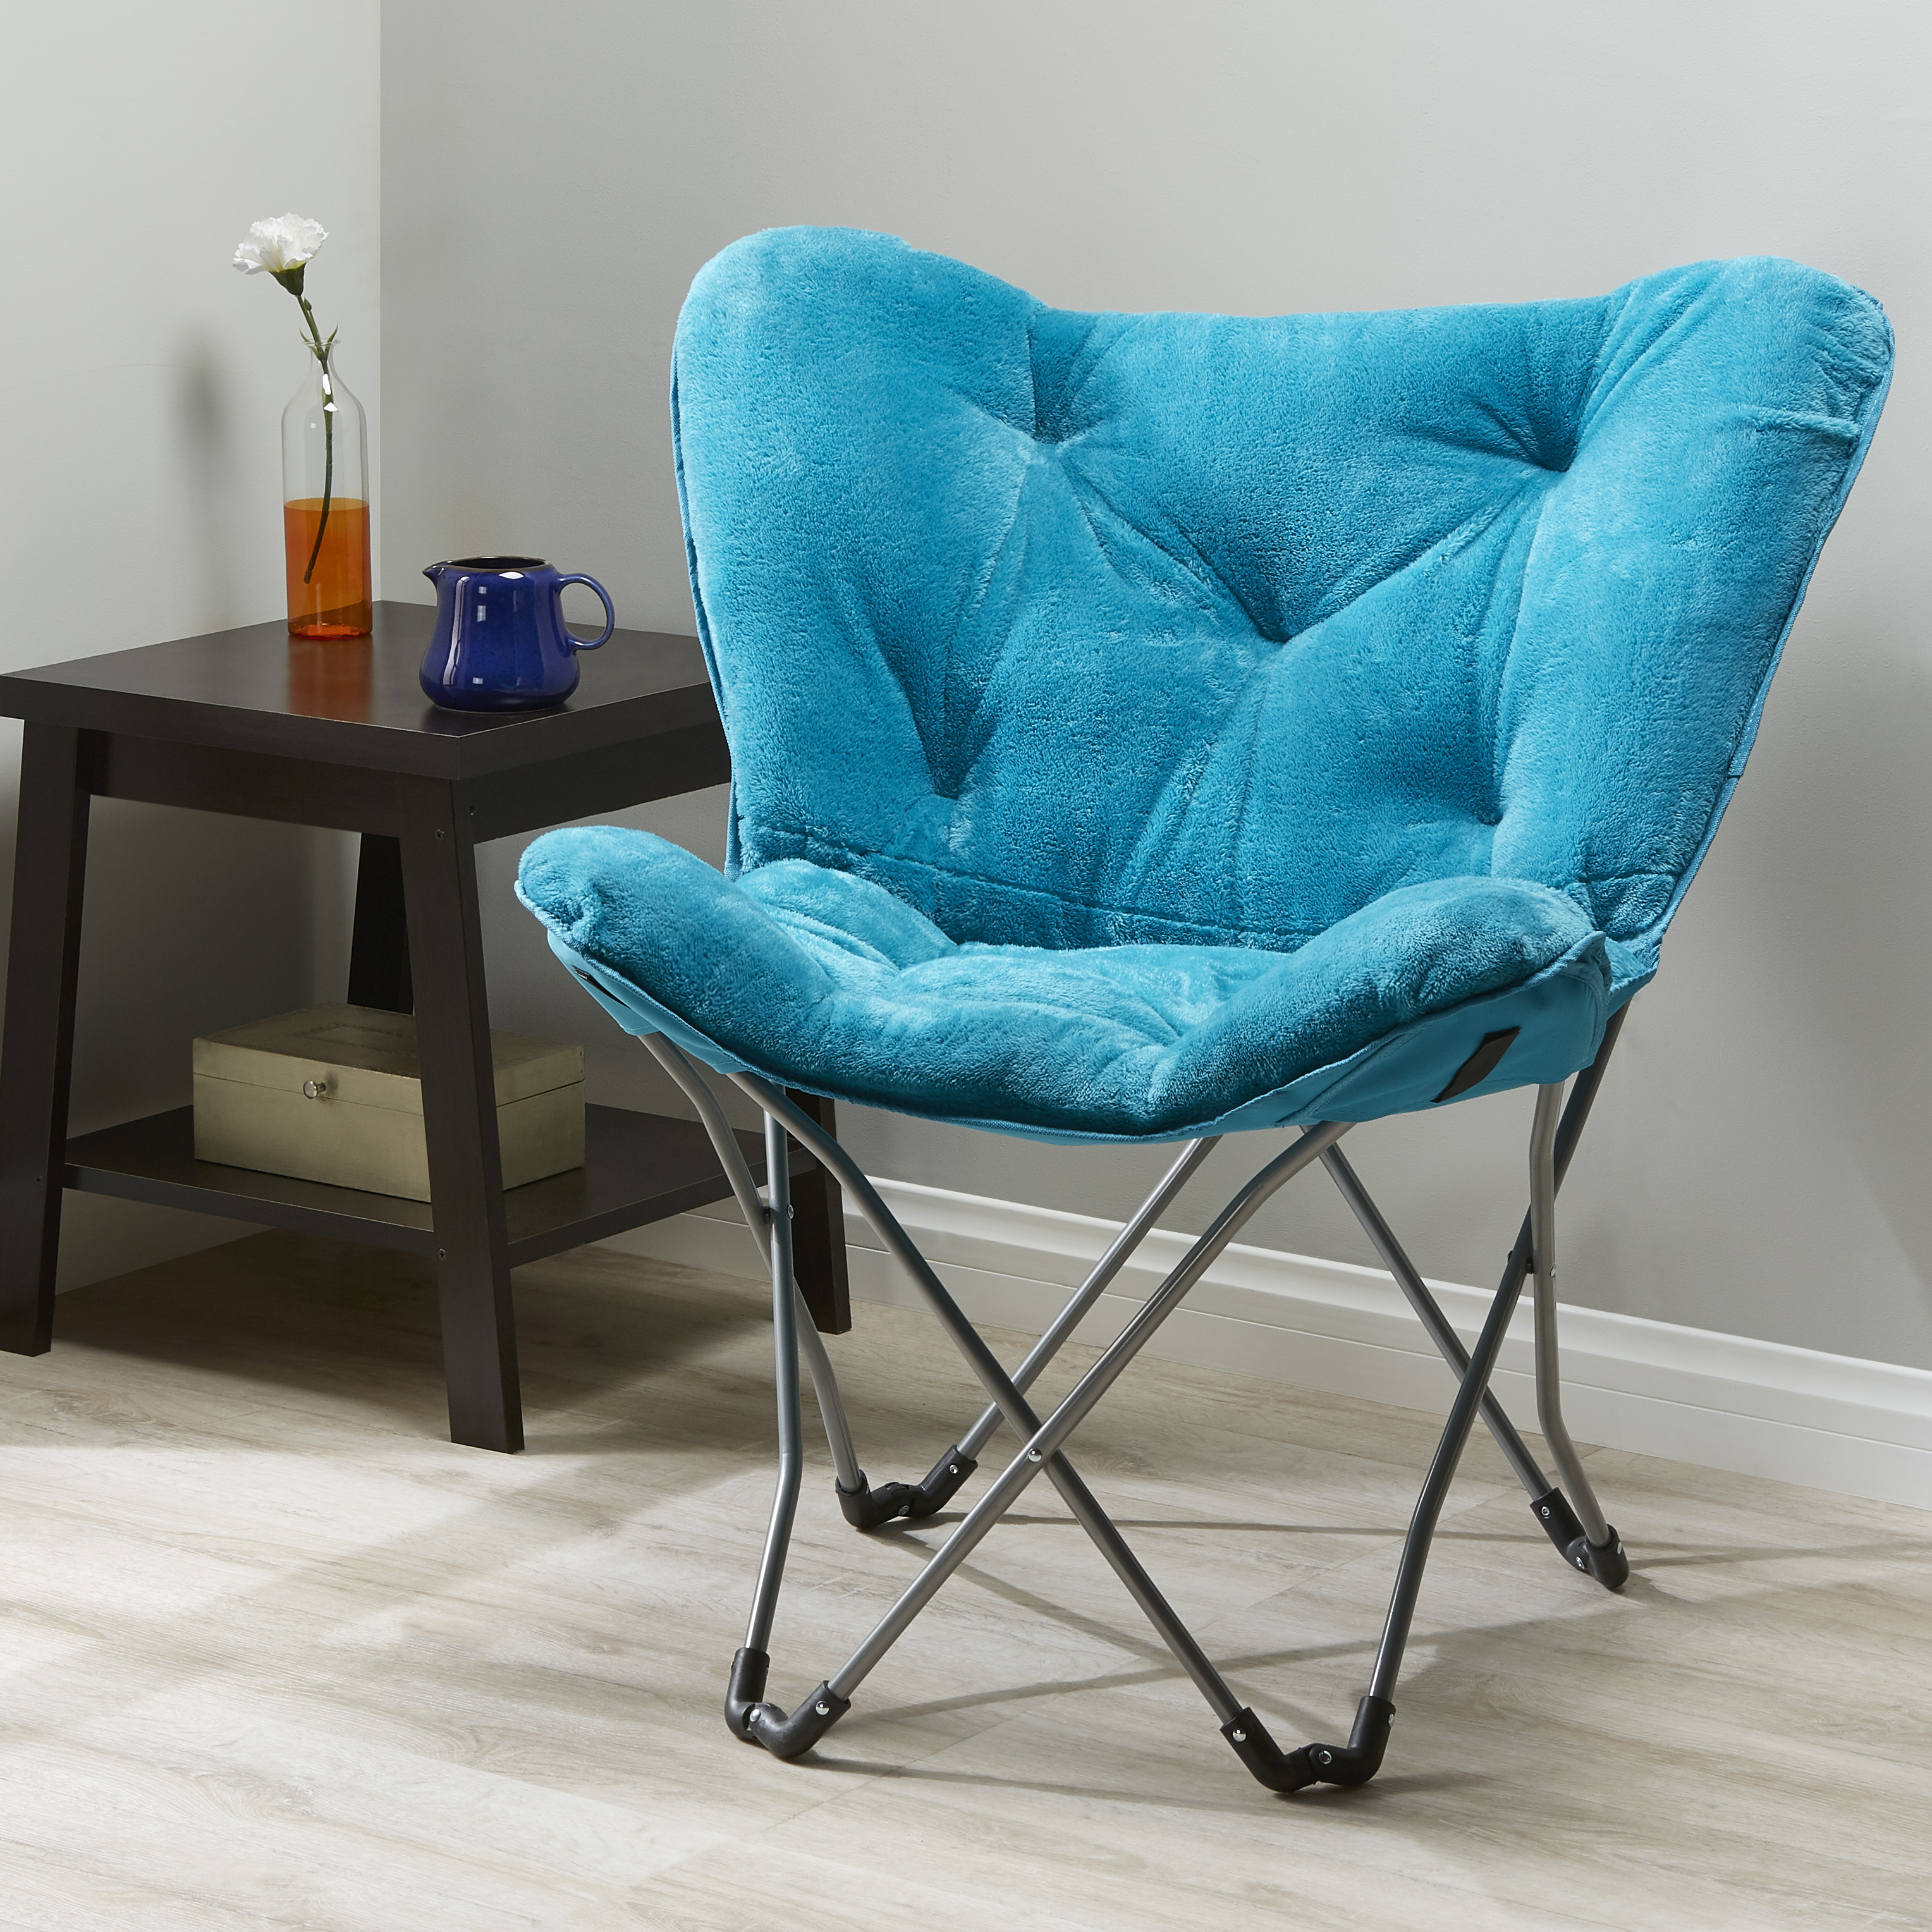 Buy Mainstays Folding Butterfly Chair